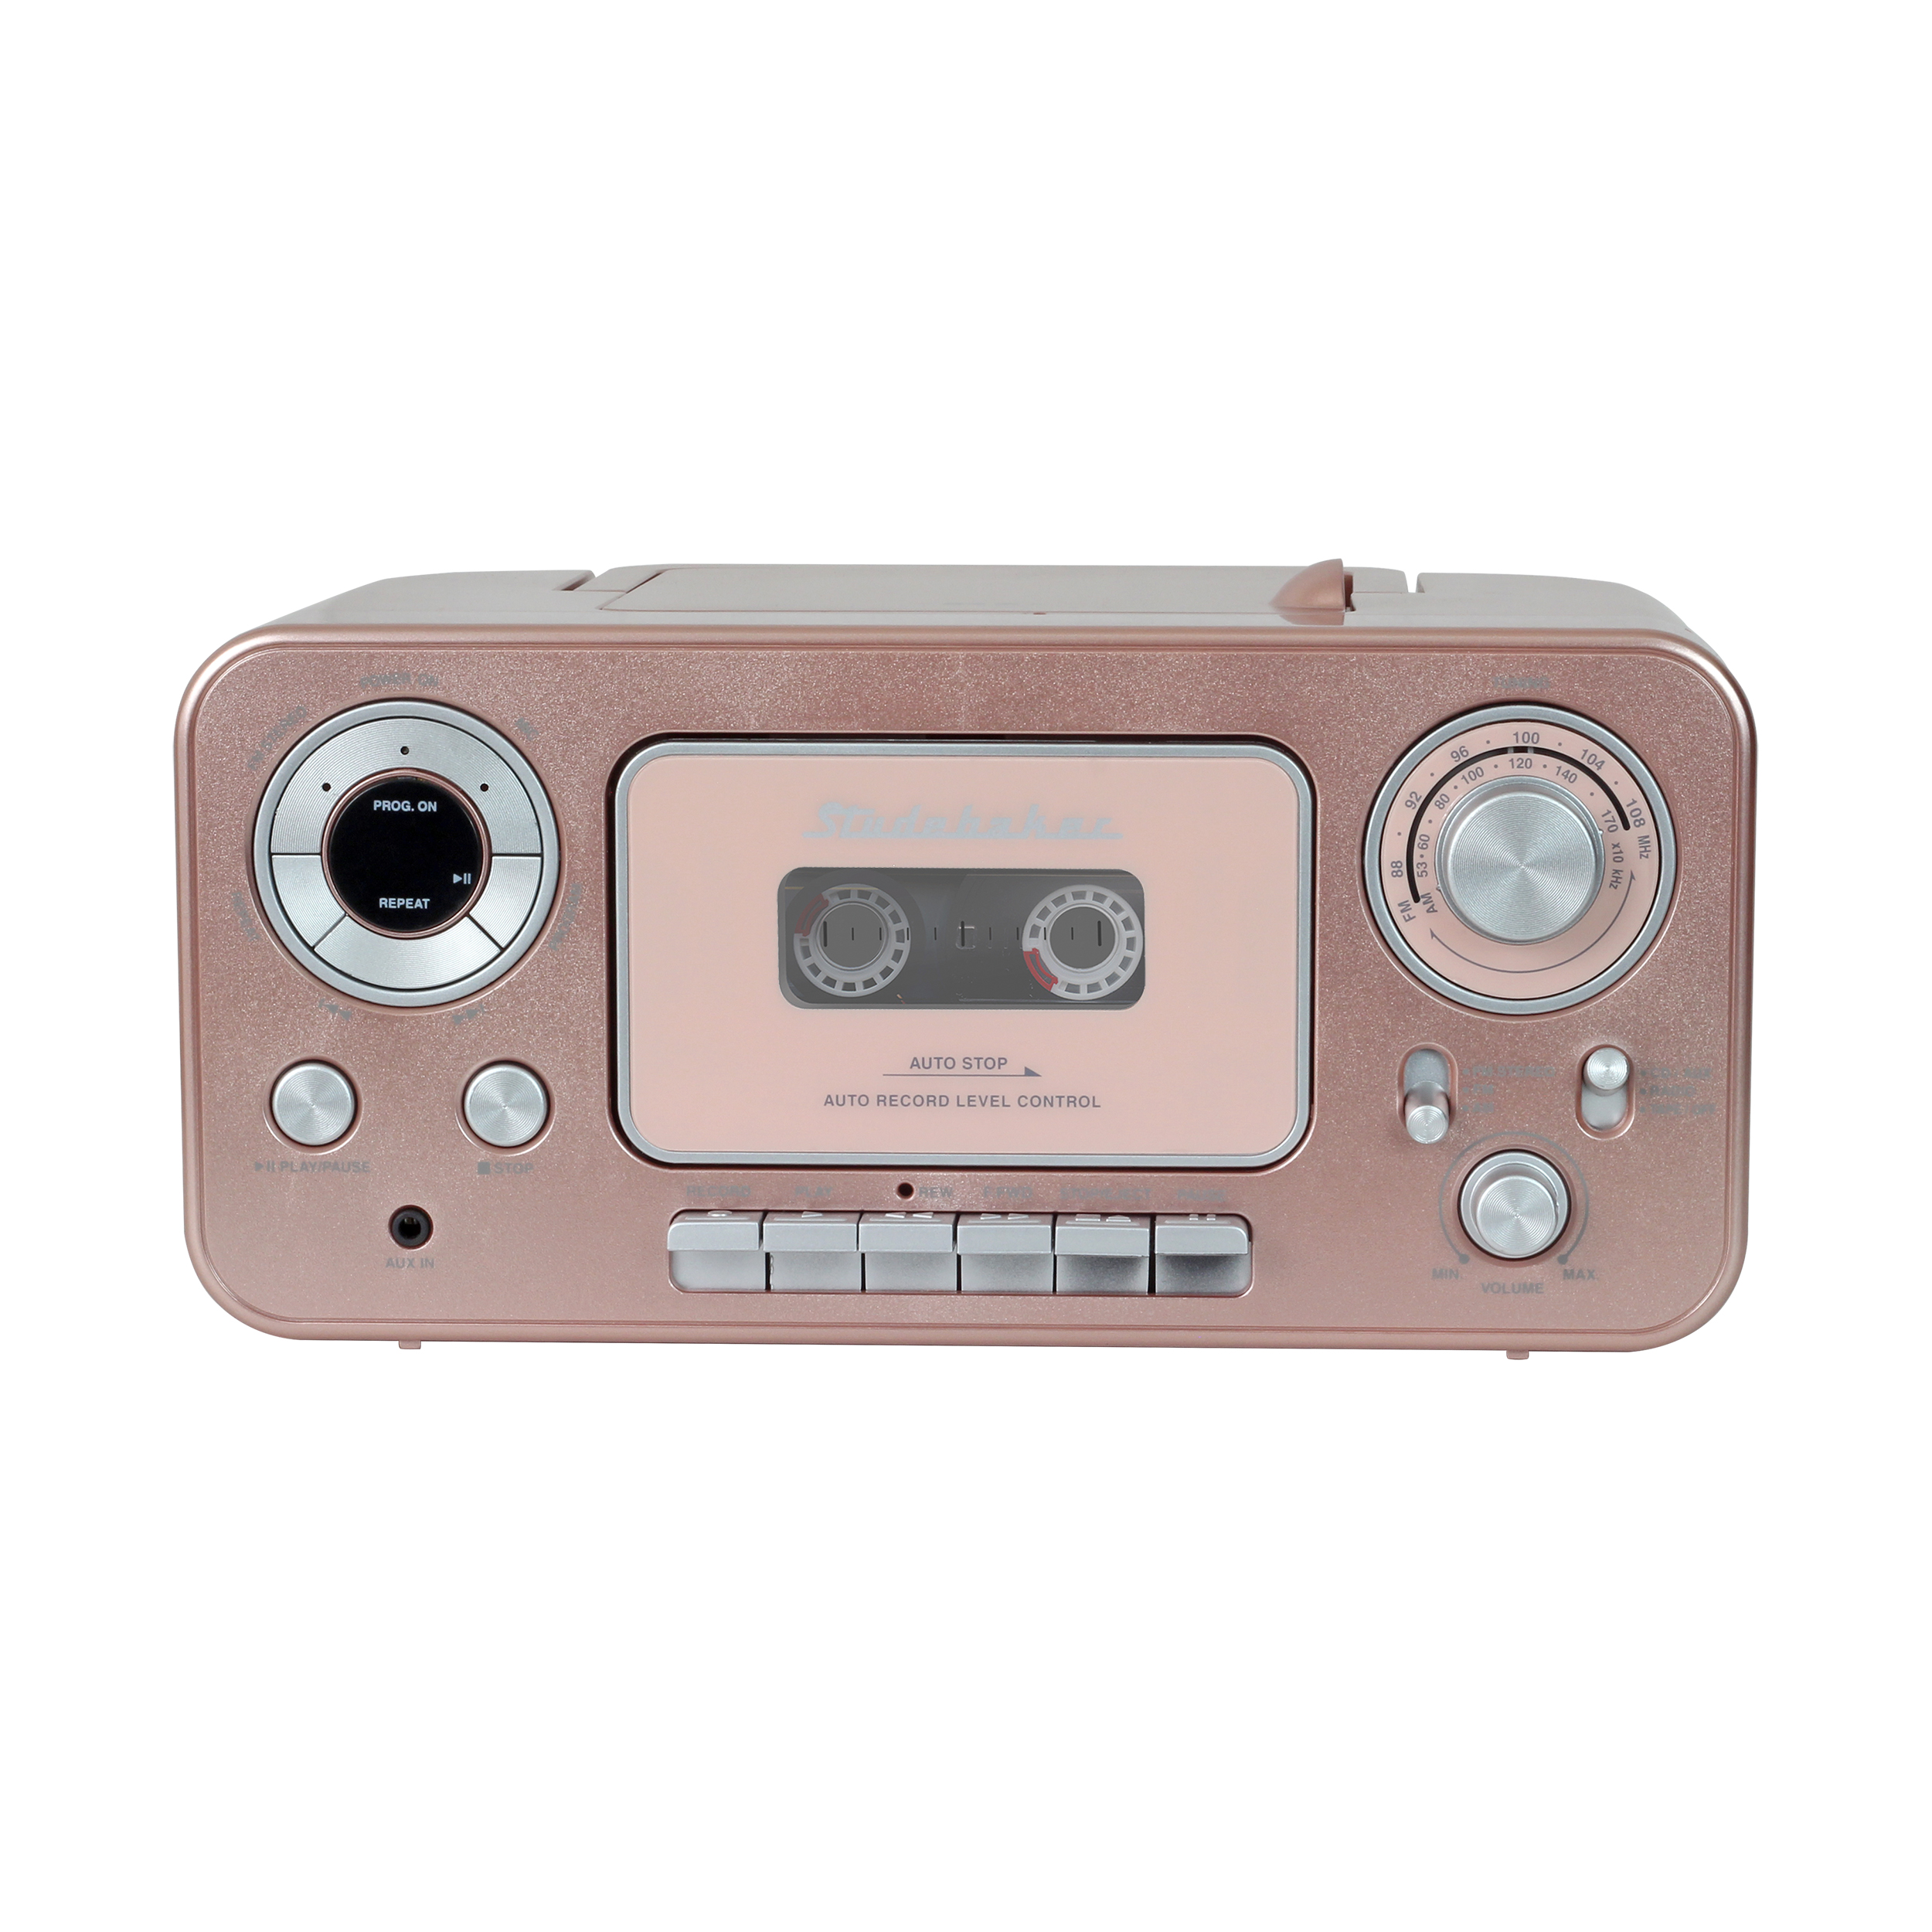 Portable Stereo CD Player with AM/FM Radio and Cassette Player/Recorder - image 3 of 4